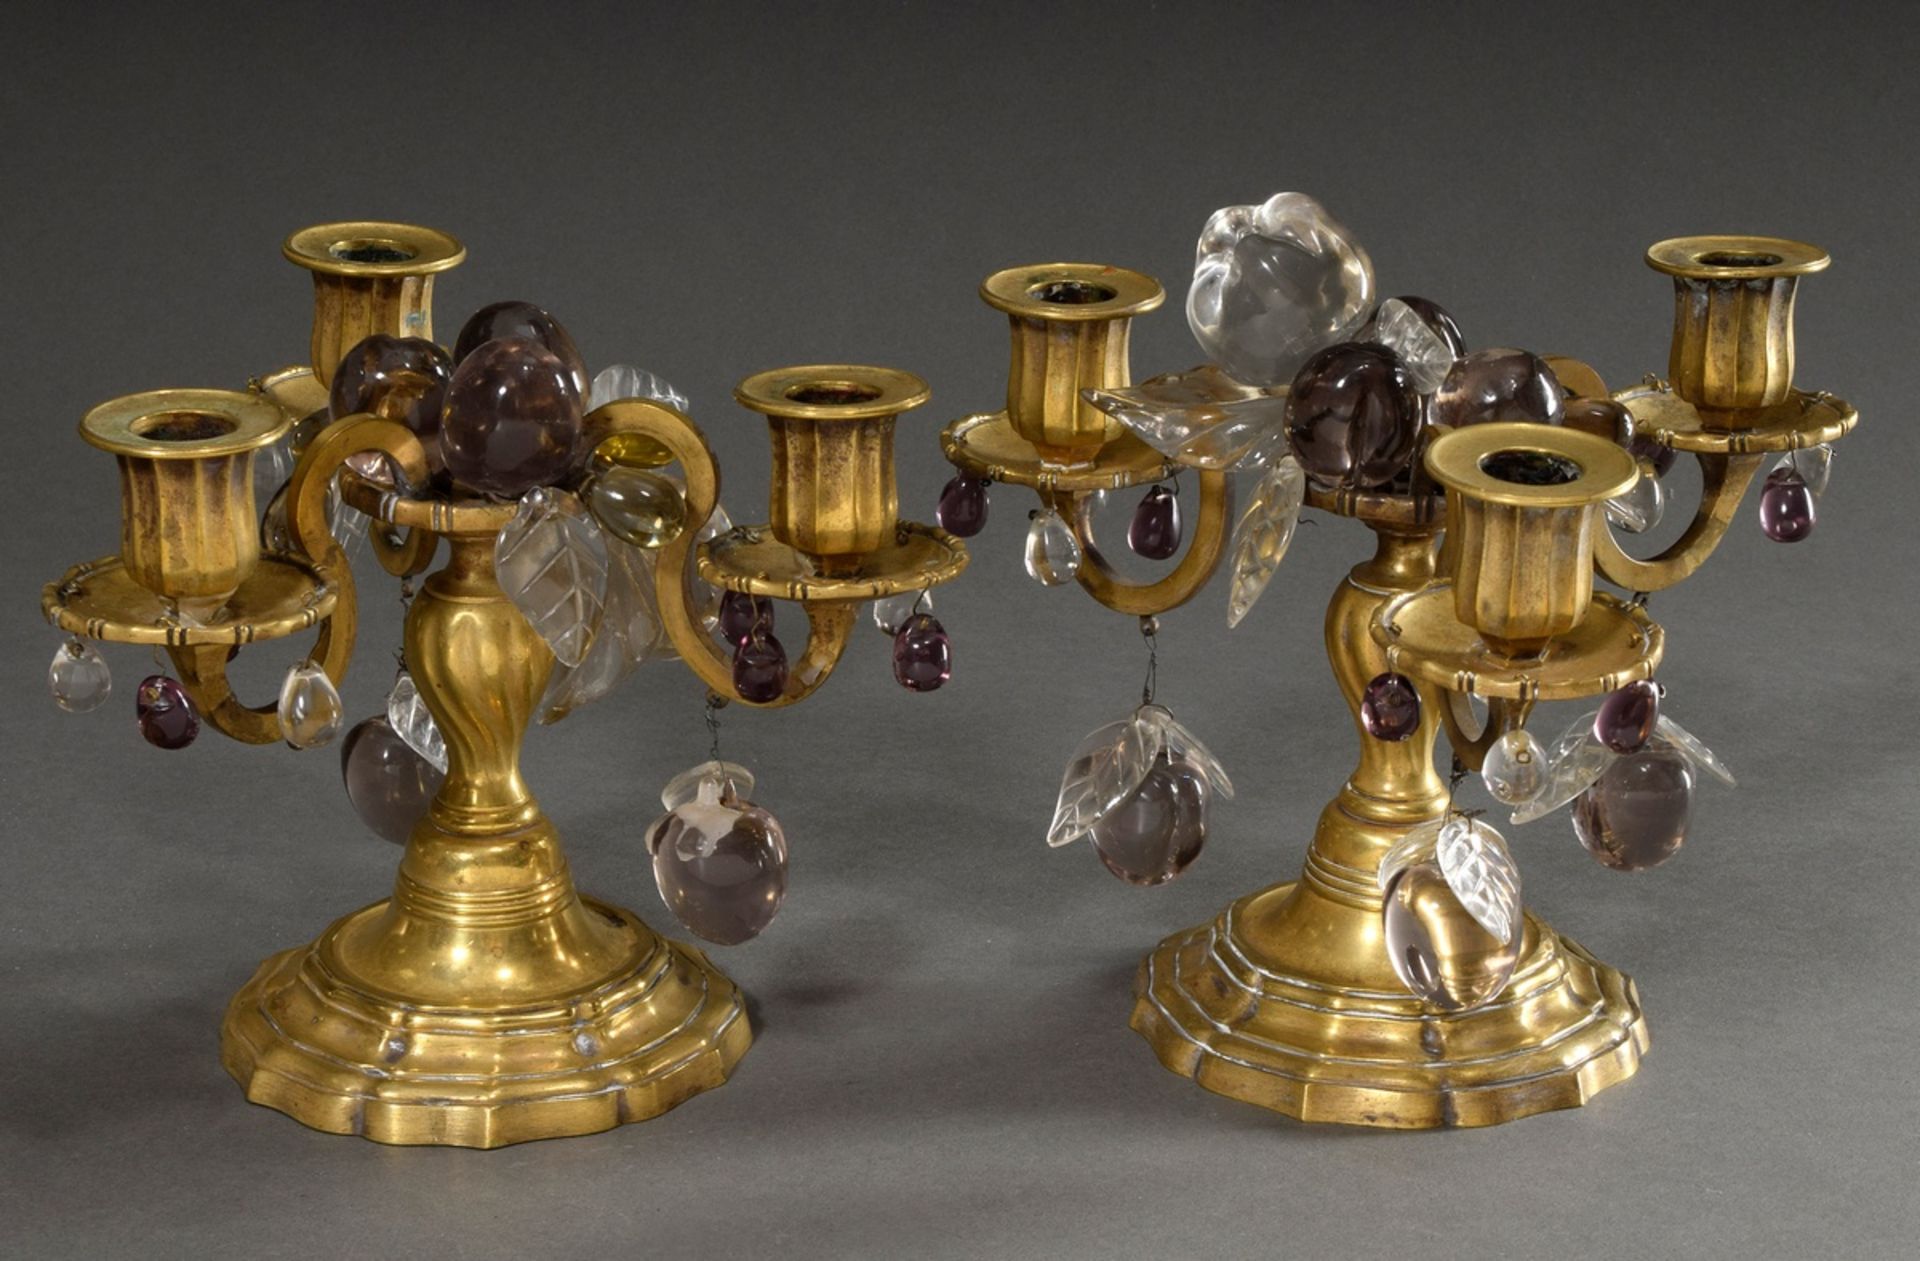 Pair of three-lamp French bronze girandoles with coloured "fruit" prisms in Louis XV style, 19th ce - Image 2 of 7